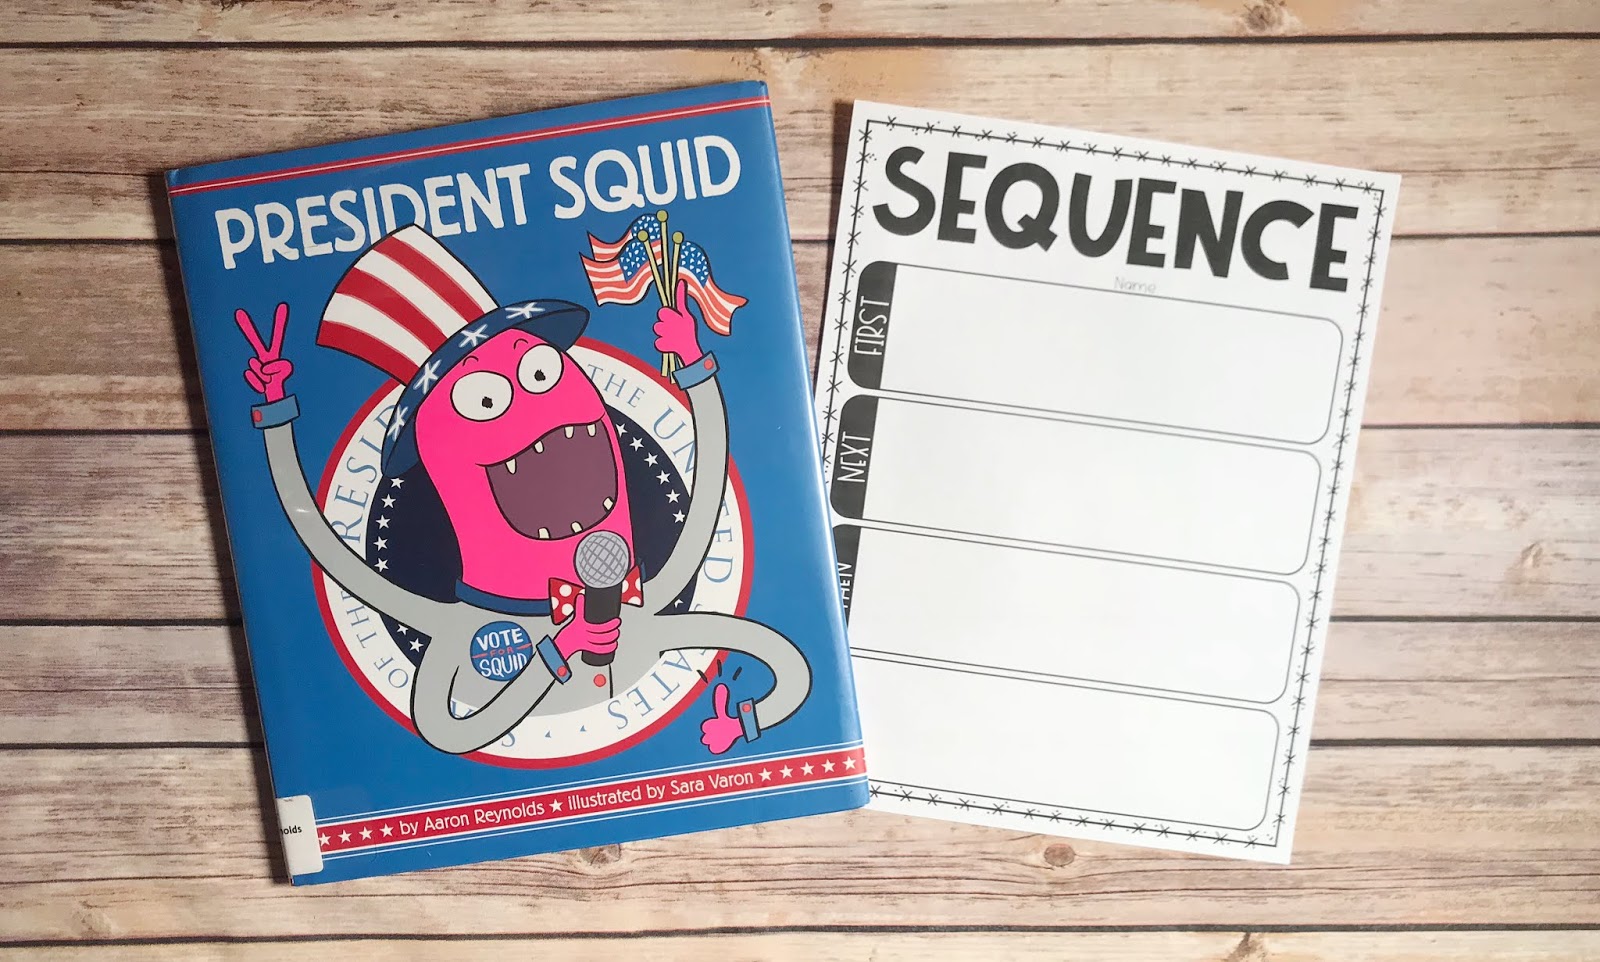 Picture Book with text "President Squid" and Sequence Graphic Organizer